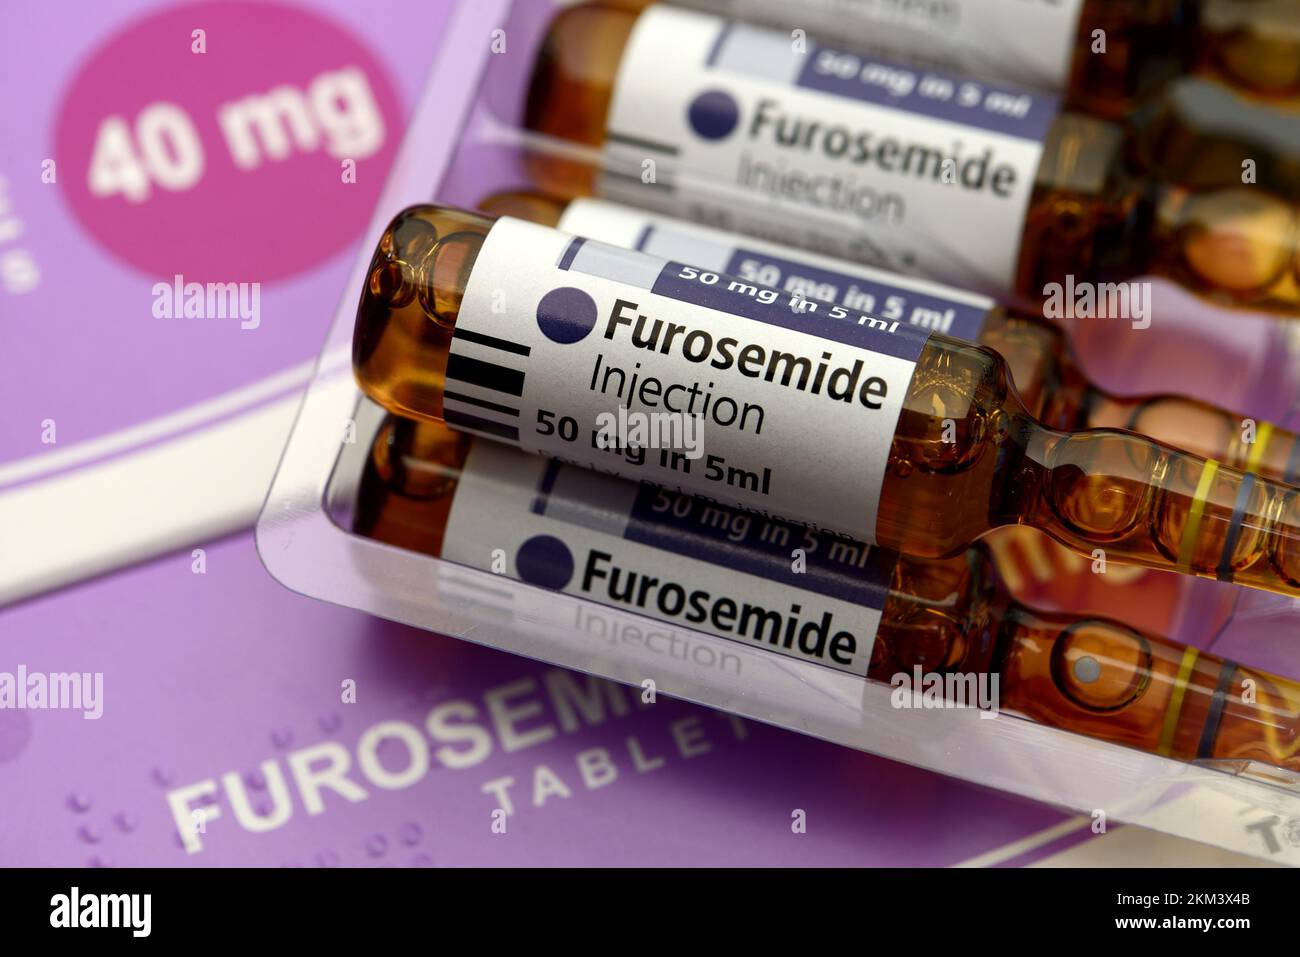 Furosomide - medicine to treat high blood pressure and oedema. 50mg phials of the liquid drug for injesction or intravenous delivery and 40mg tablets Stock Photo